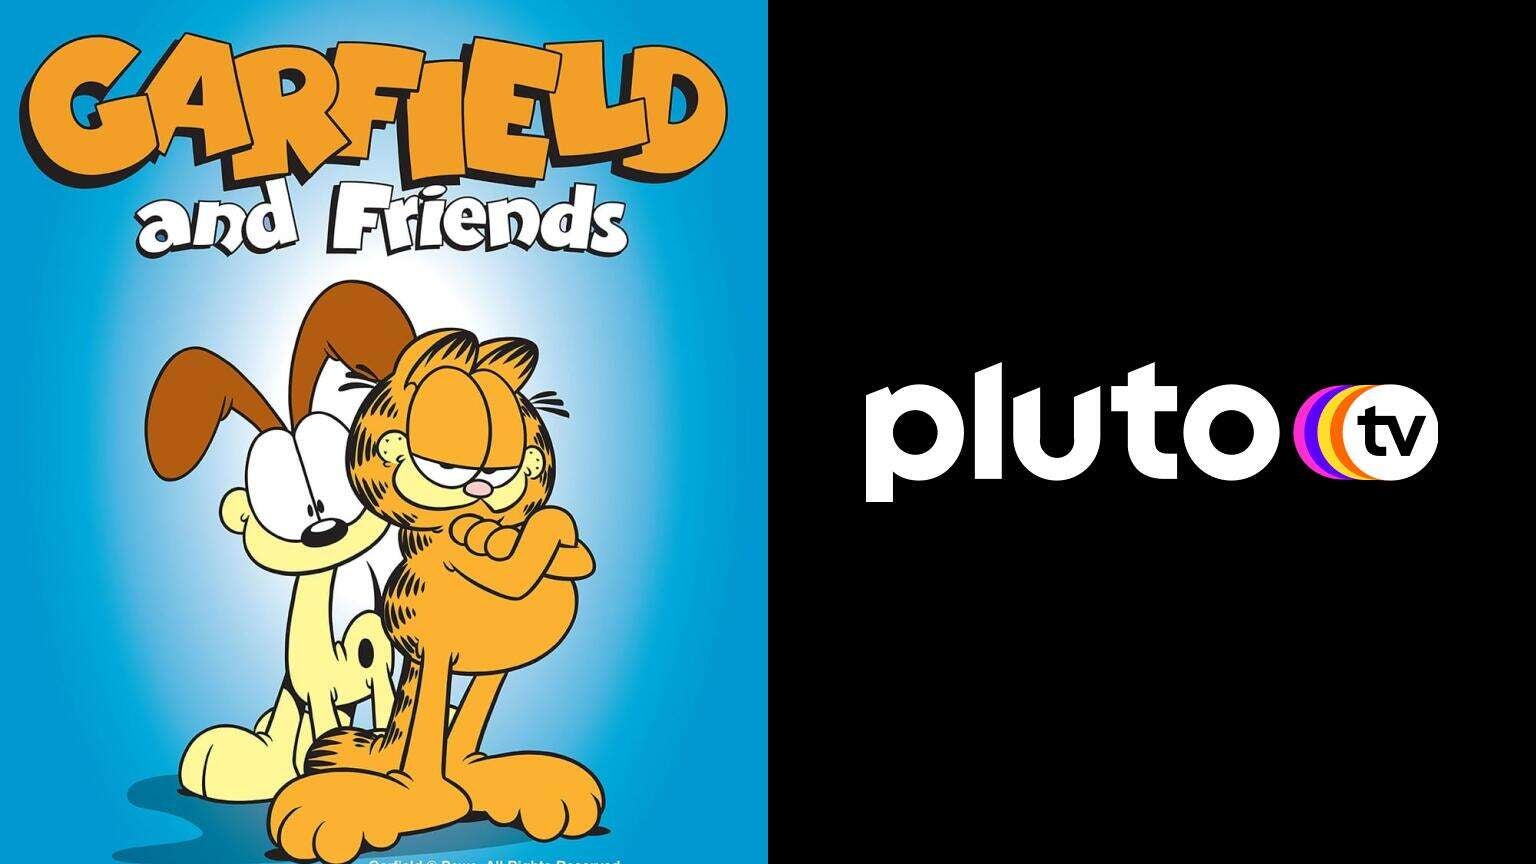 Pluto Tv Adds Three Kids Channels Including Garfield And Friends